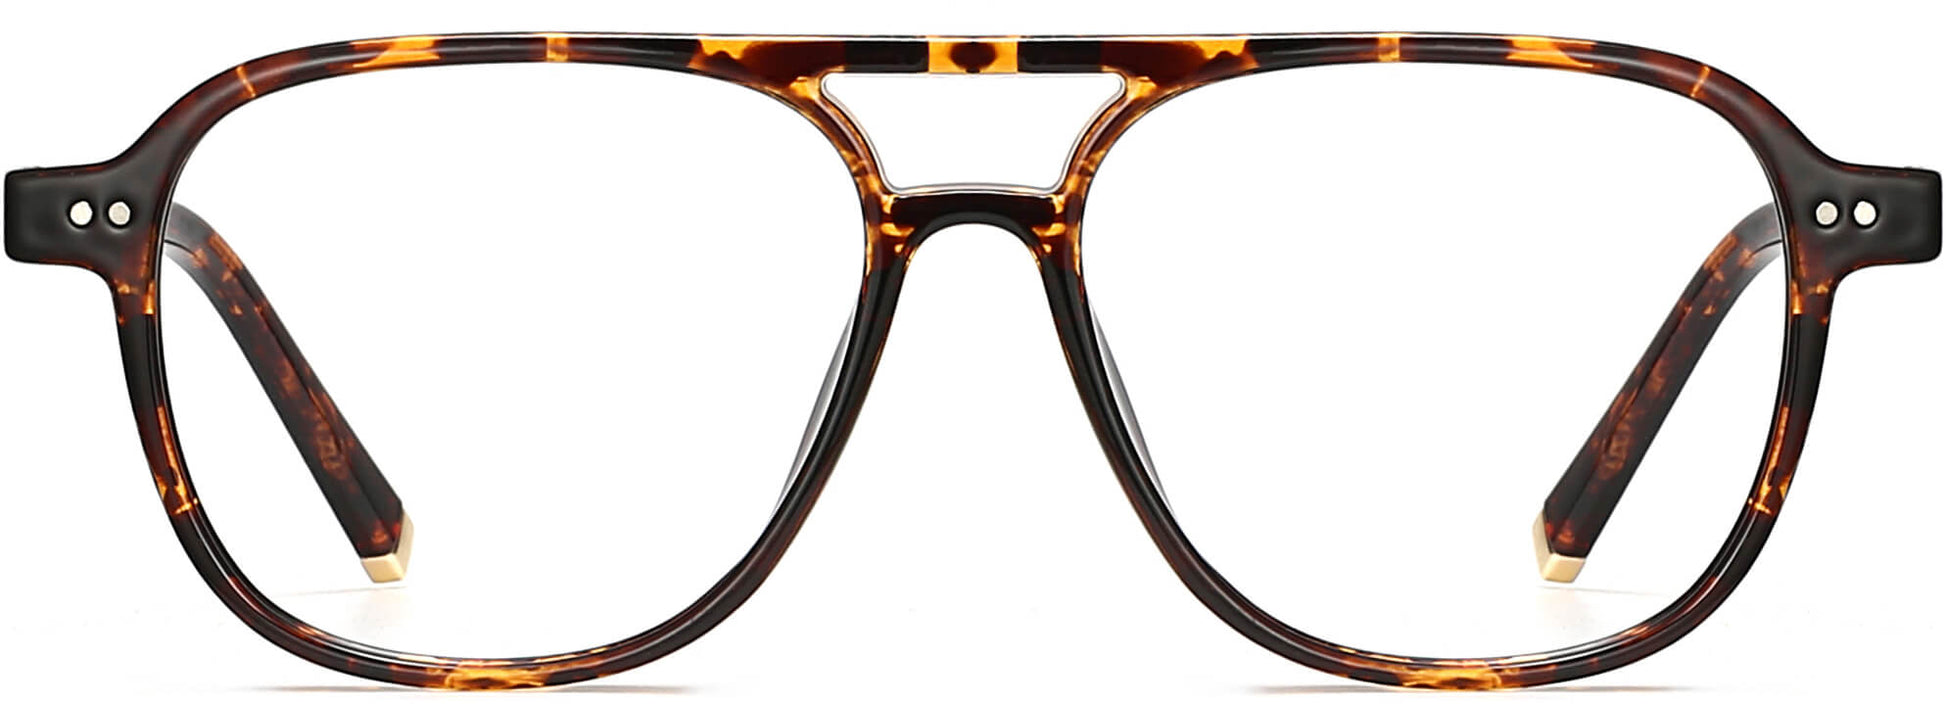 Haisley Square Tortoise Eyeglasses from ANRRI, front view